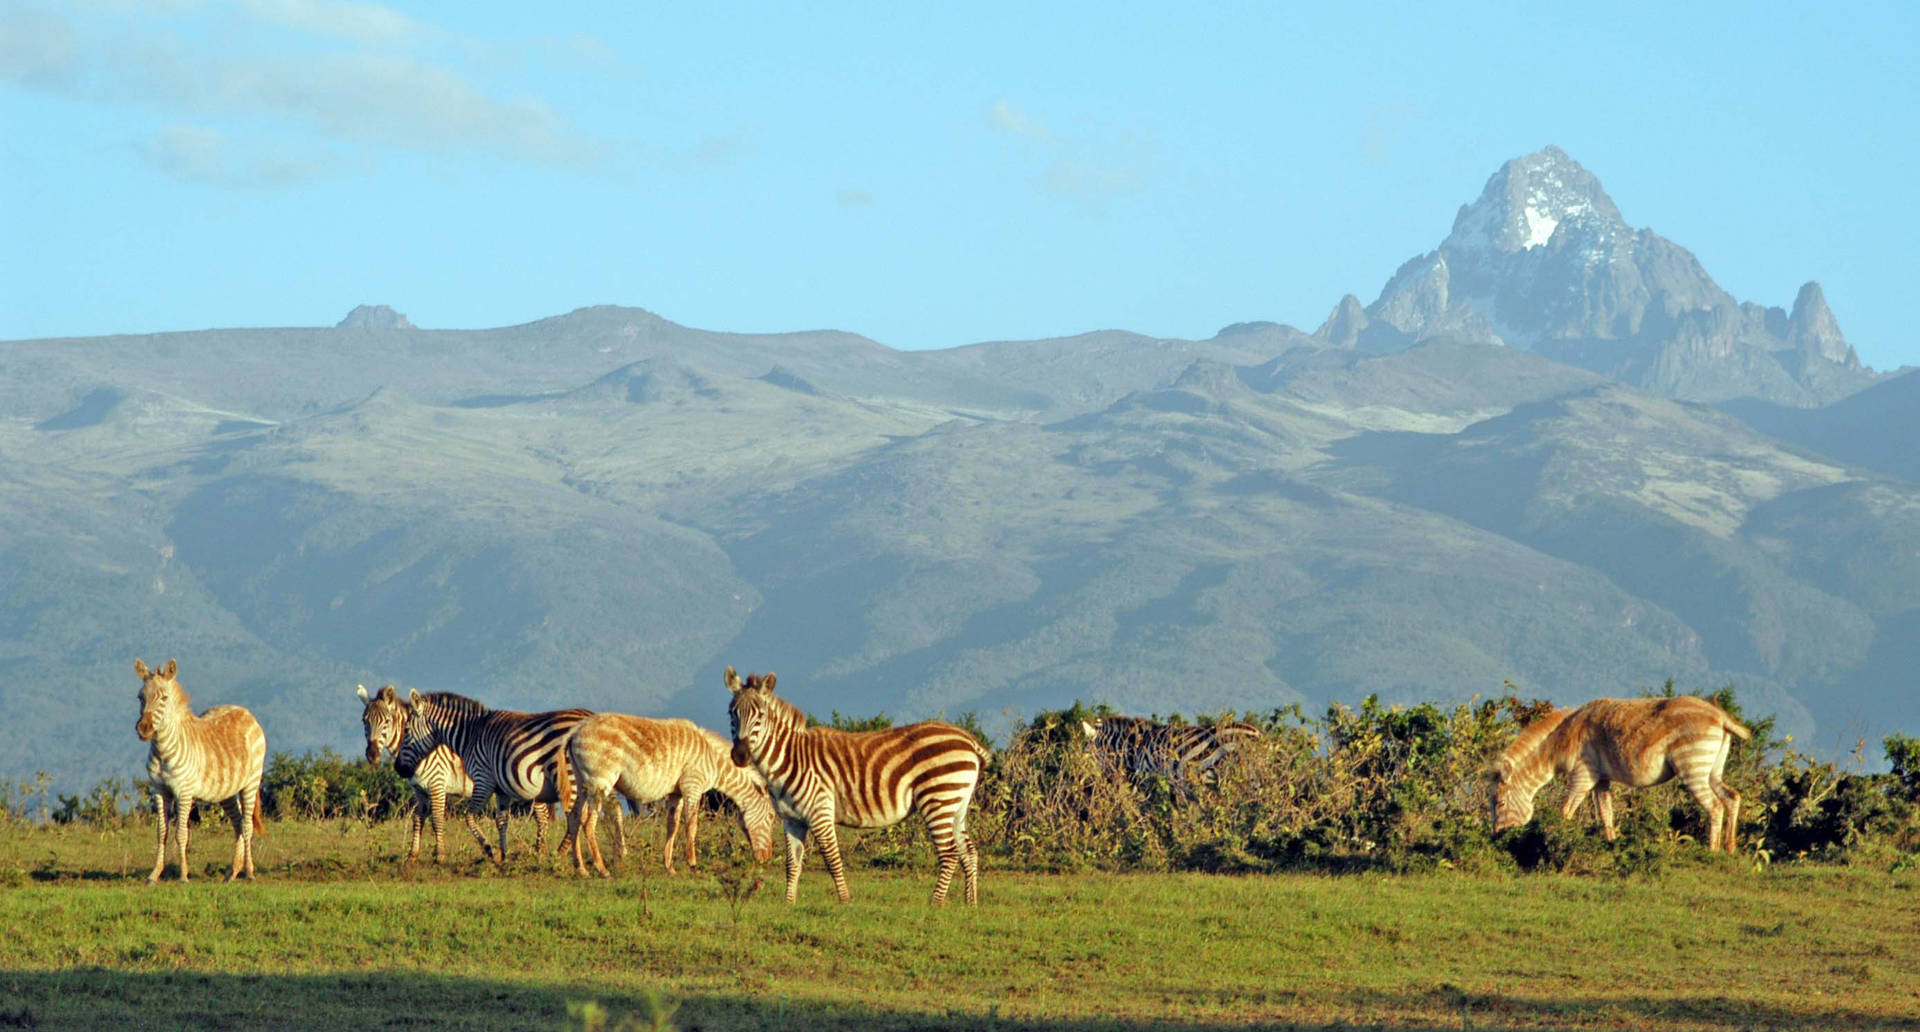 Mountain View In Kenya Africa Background